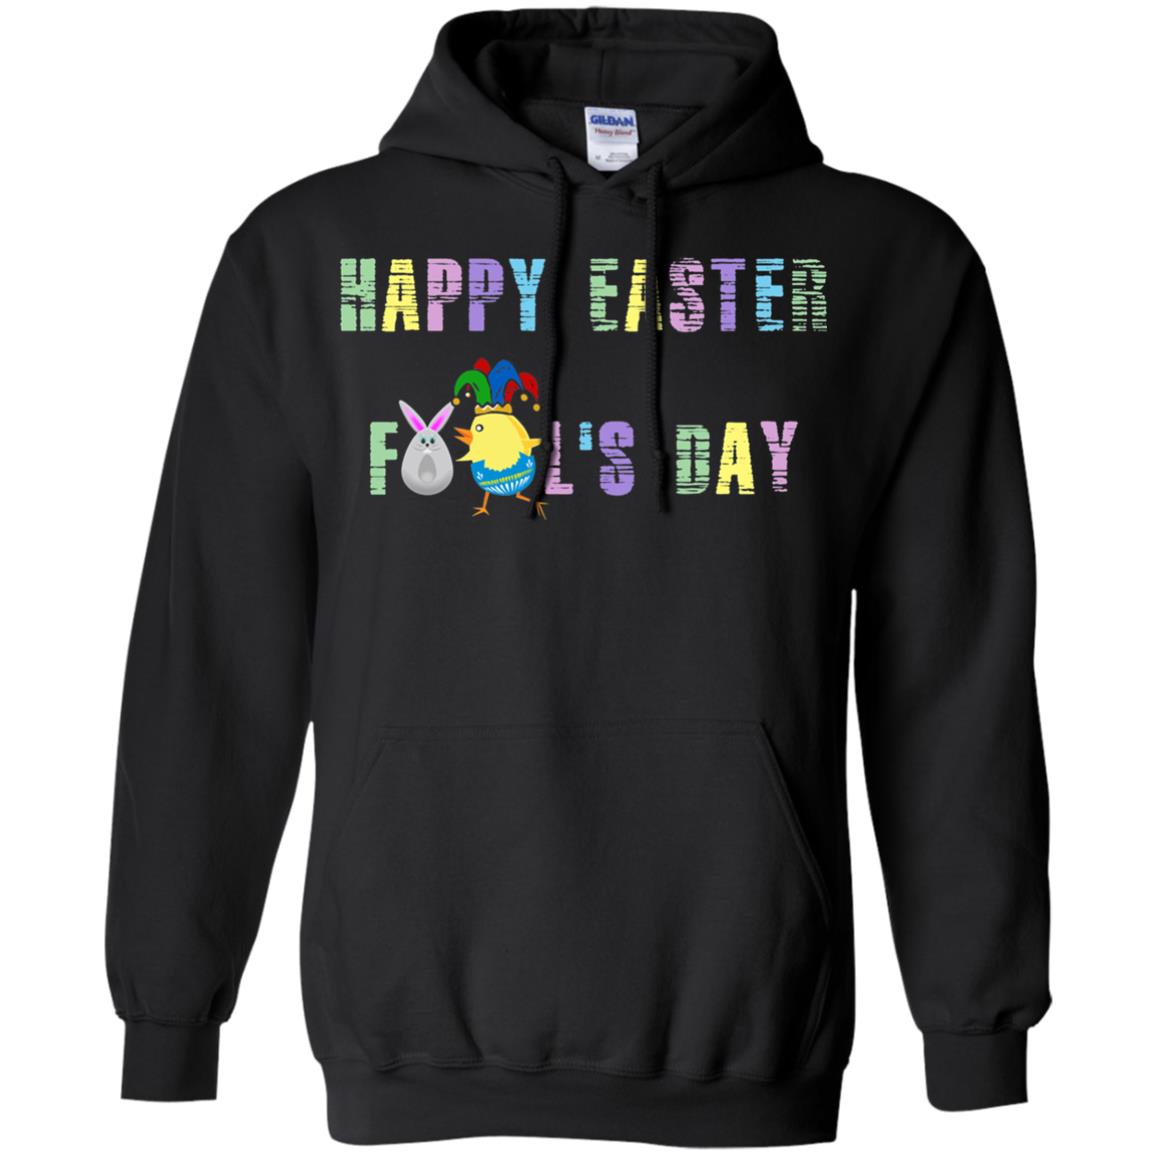 Happy Easter Fools Day Shirt